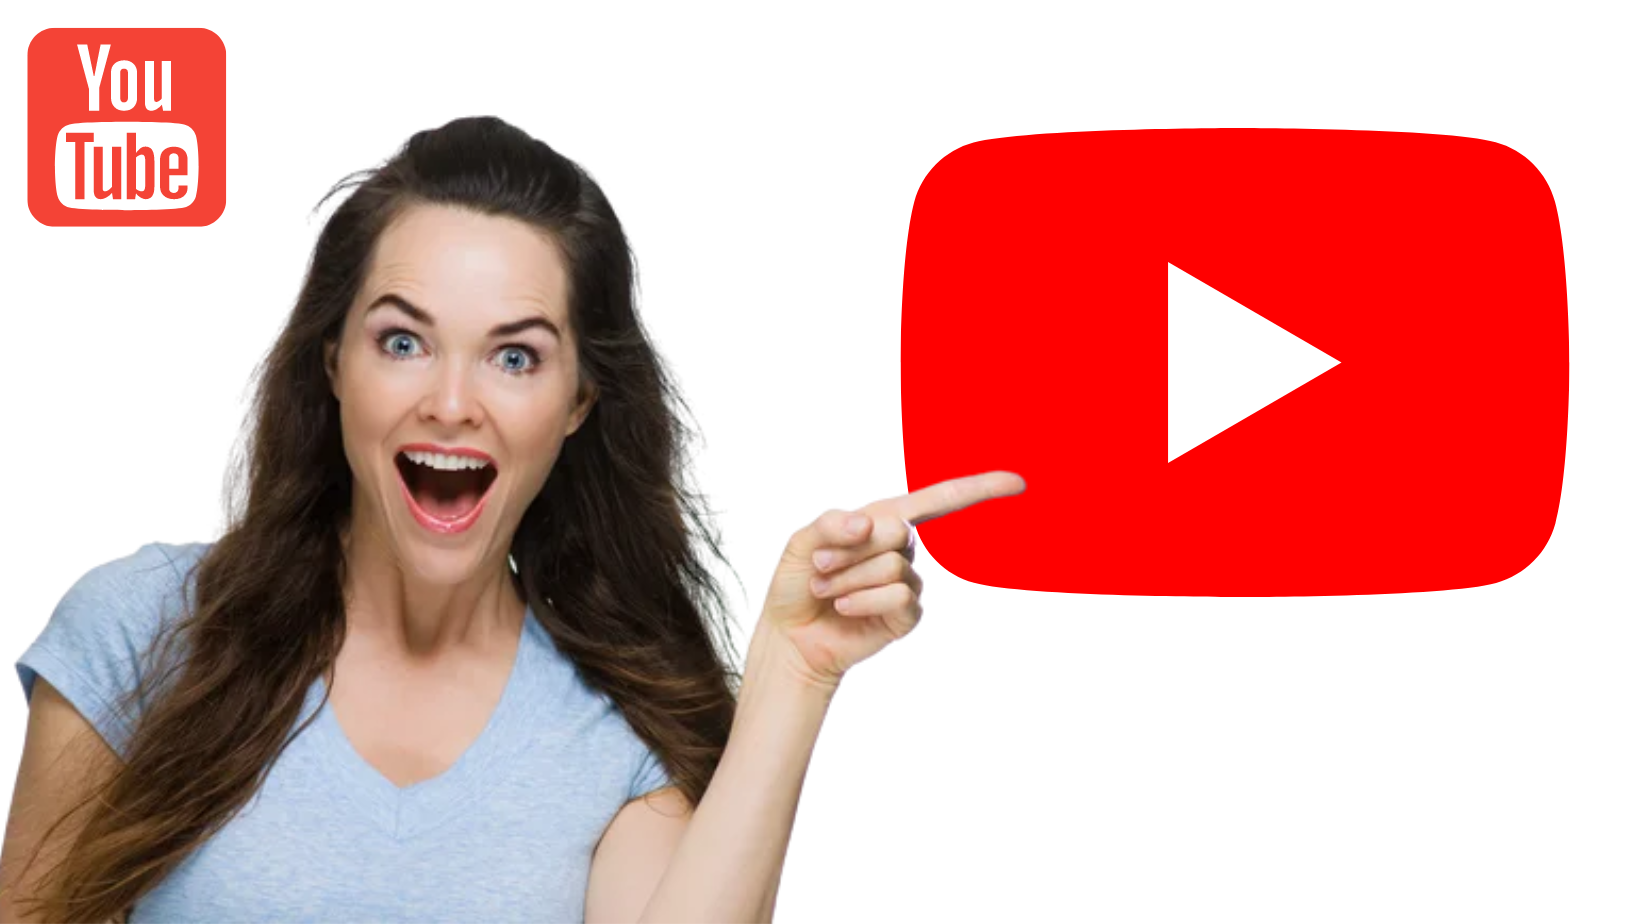 20 Proven tips to Promote Your YouTube Channel for More Views